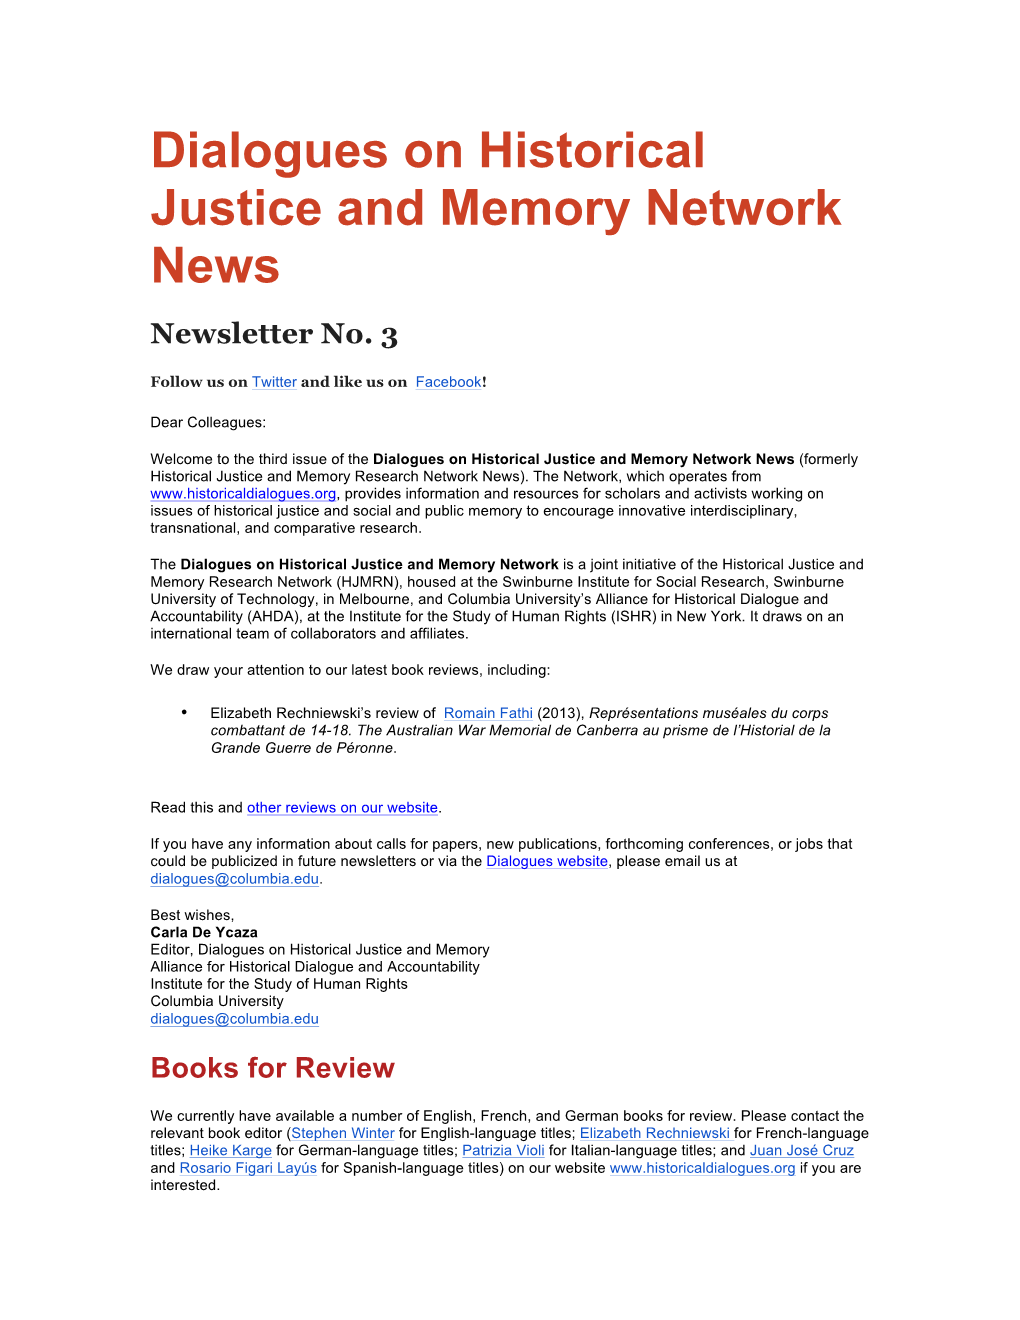 Dialogues on Historical Justice and Memory Network News